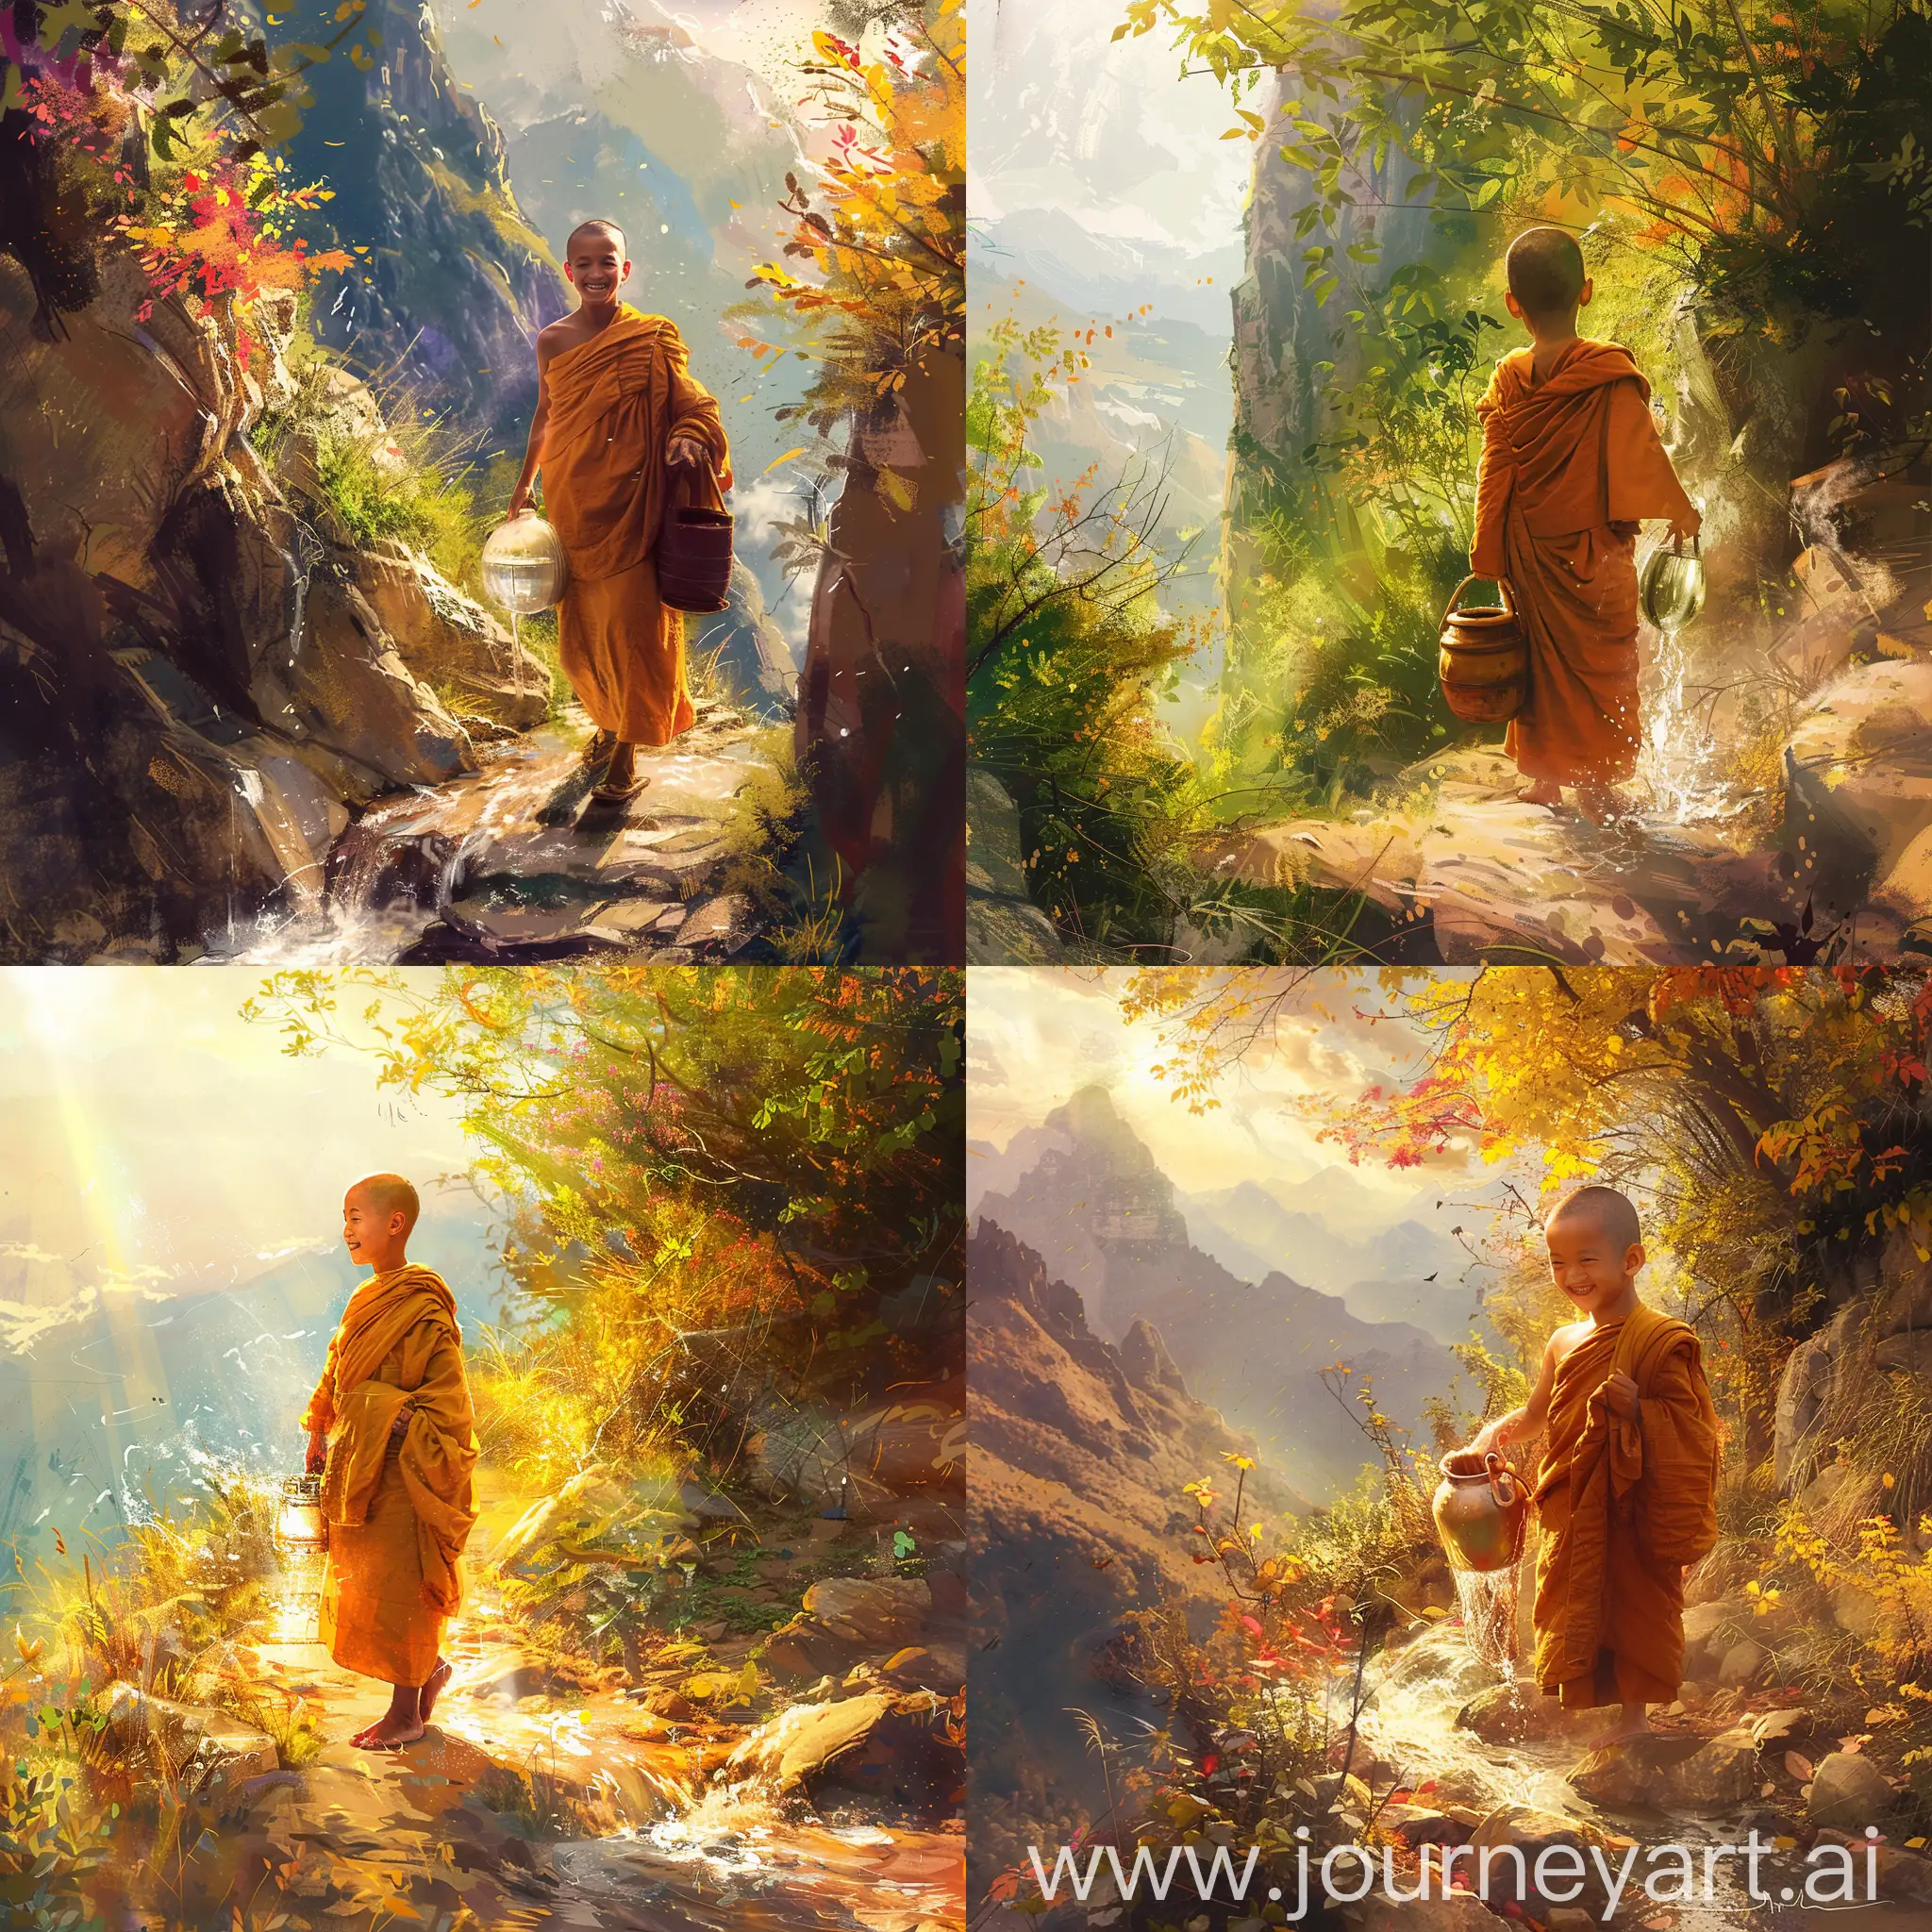 a young and happy monk, carrying water on a mountain path, warm color palette, serene environment, bright sunshine, vivid expressions, flowing water, earthy tones, vibrant foliage, an atmosphere of joy.